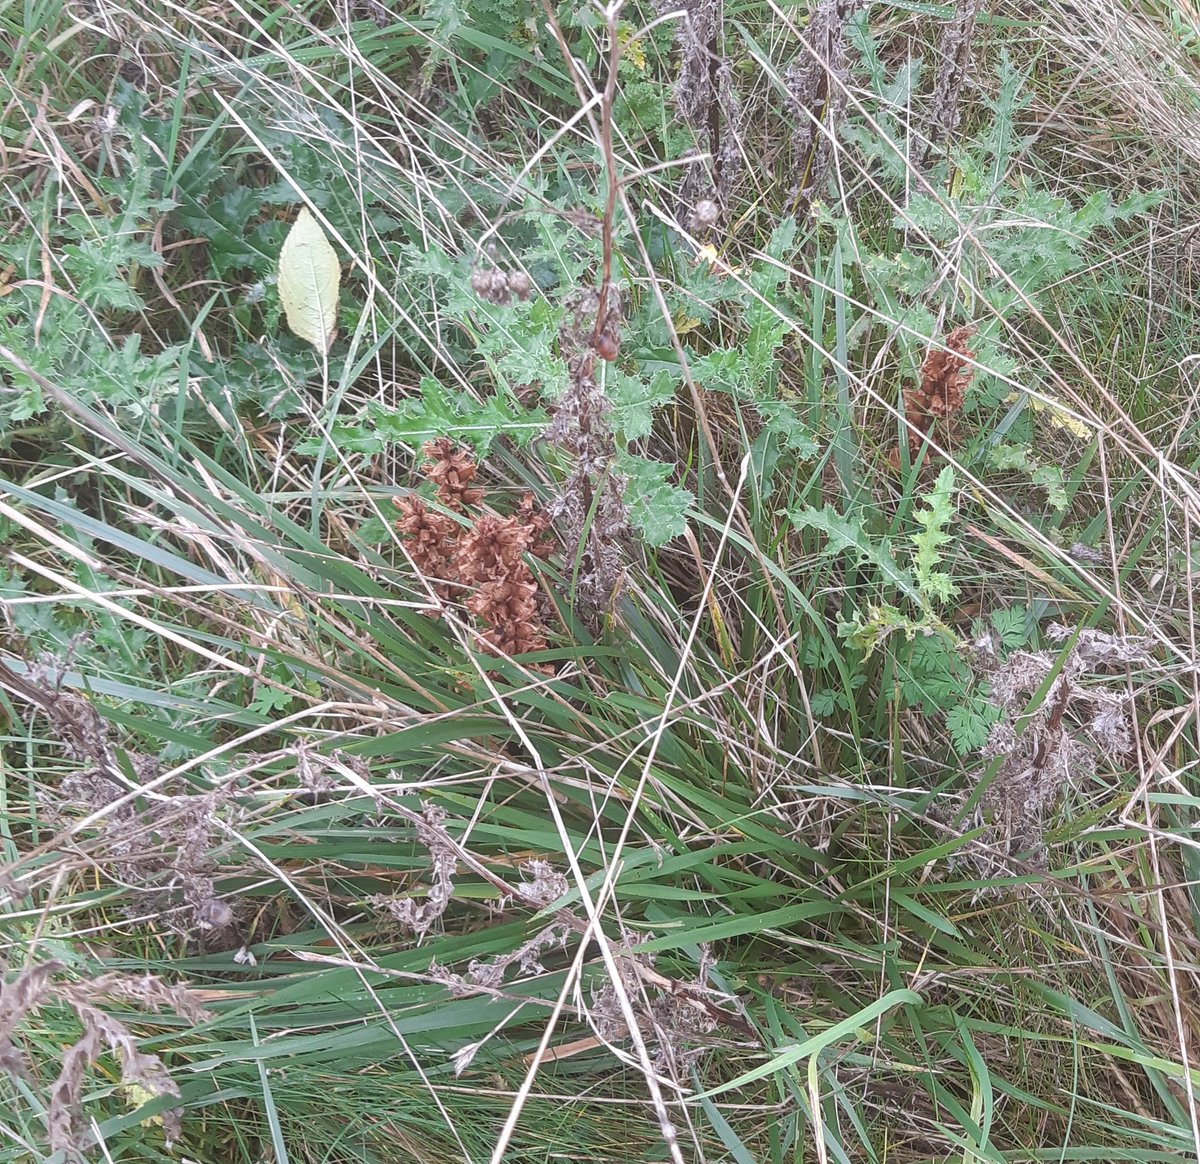 A group of 6 of the rare Thistle (or Yorkshire) Broomrape Orobanche reticulata growing on Pennycroft, marked to prevent accidental damage. The flowering stems seem quite short this year, so there may be more we've not spotted yet. @NEFieldUnit